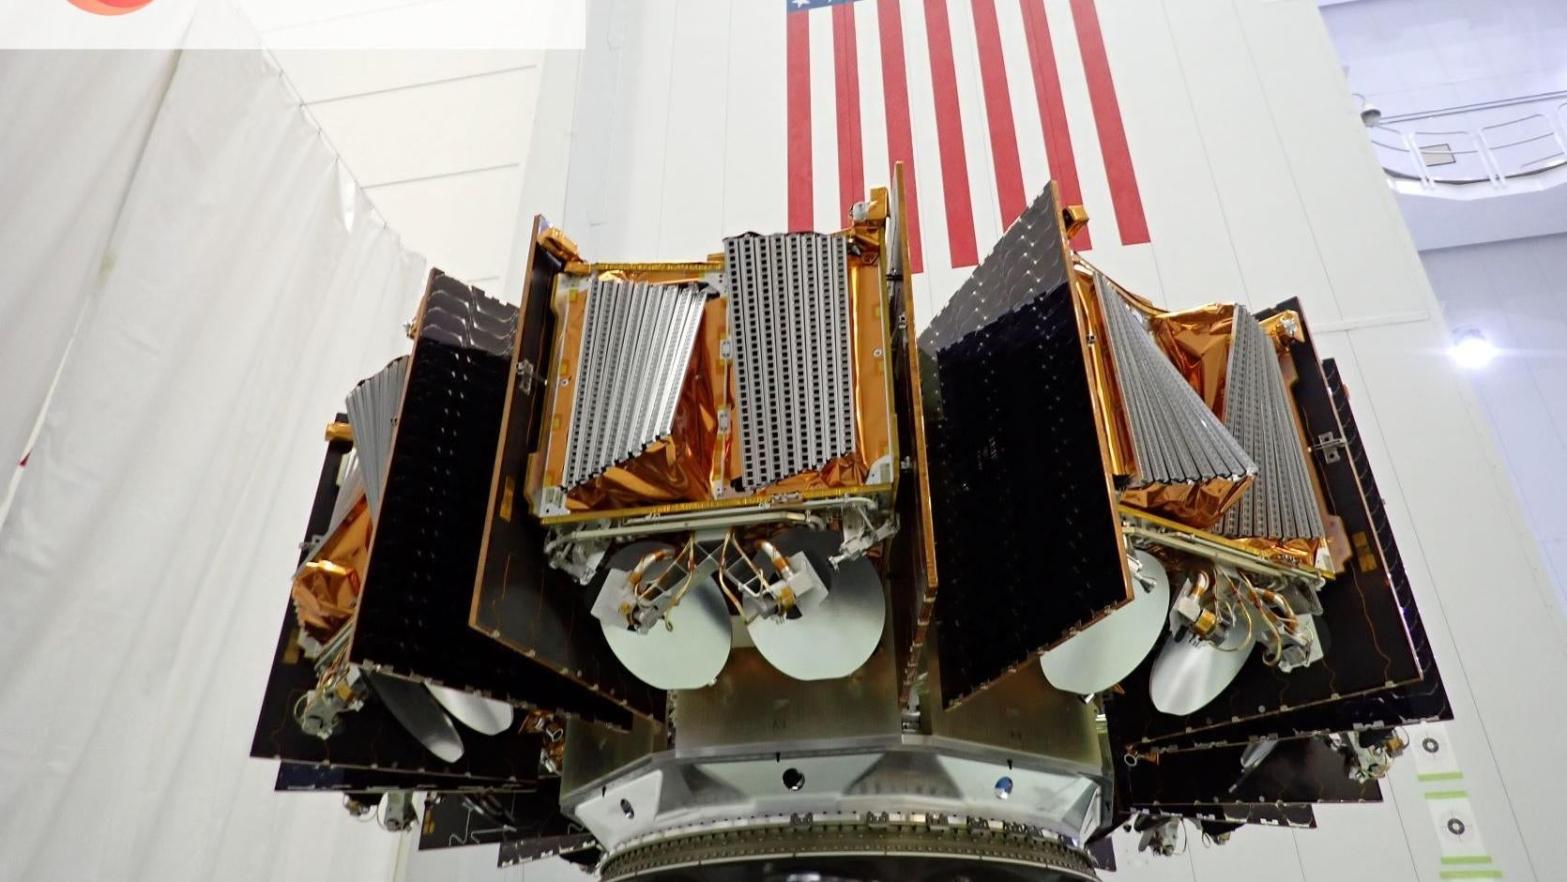 The OneWeb satellites attached to the dispenser ahead of their launch to low Earth orbit. (Photo: OneWeb)